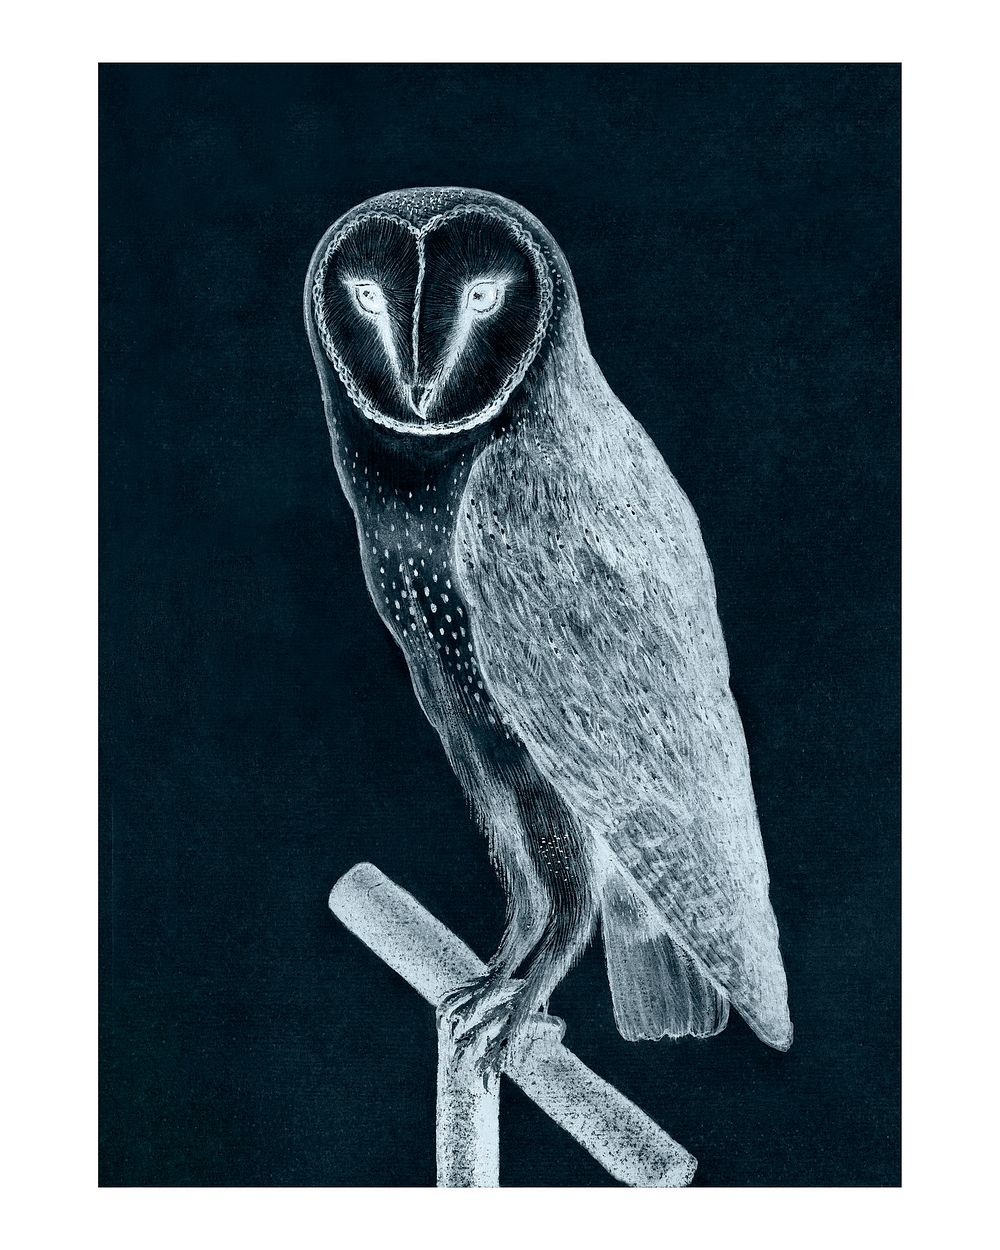 Barn owl with negative effect vintage illustration wall art print and poster design remix from original artwork.